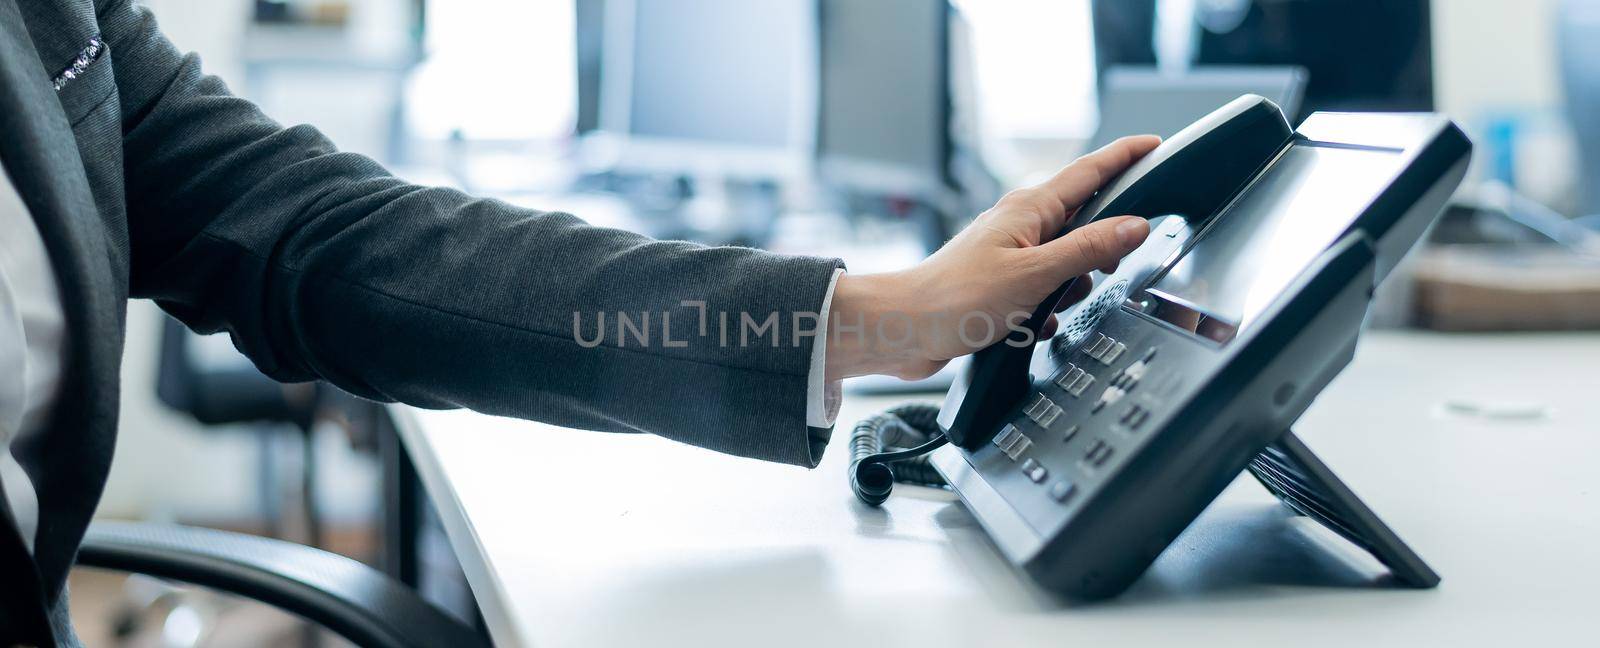 Close-up of a female employee's hand on a landline phone. Woman picks up a push-button telephone at the workplace in the office by mrwed54